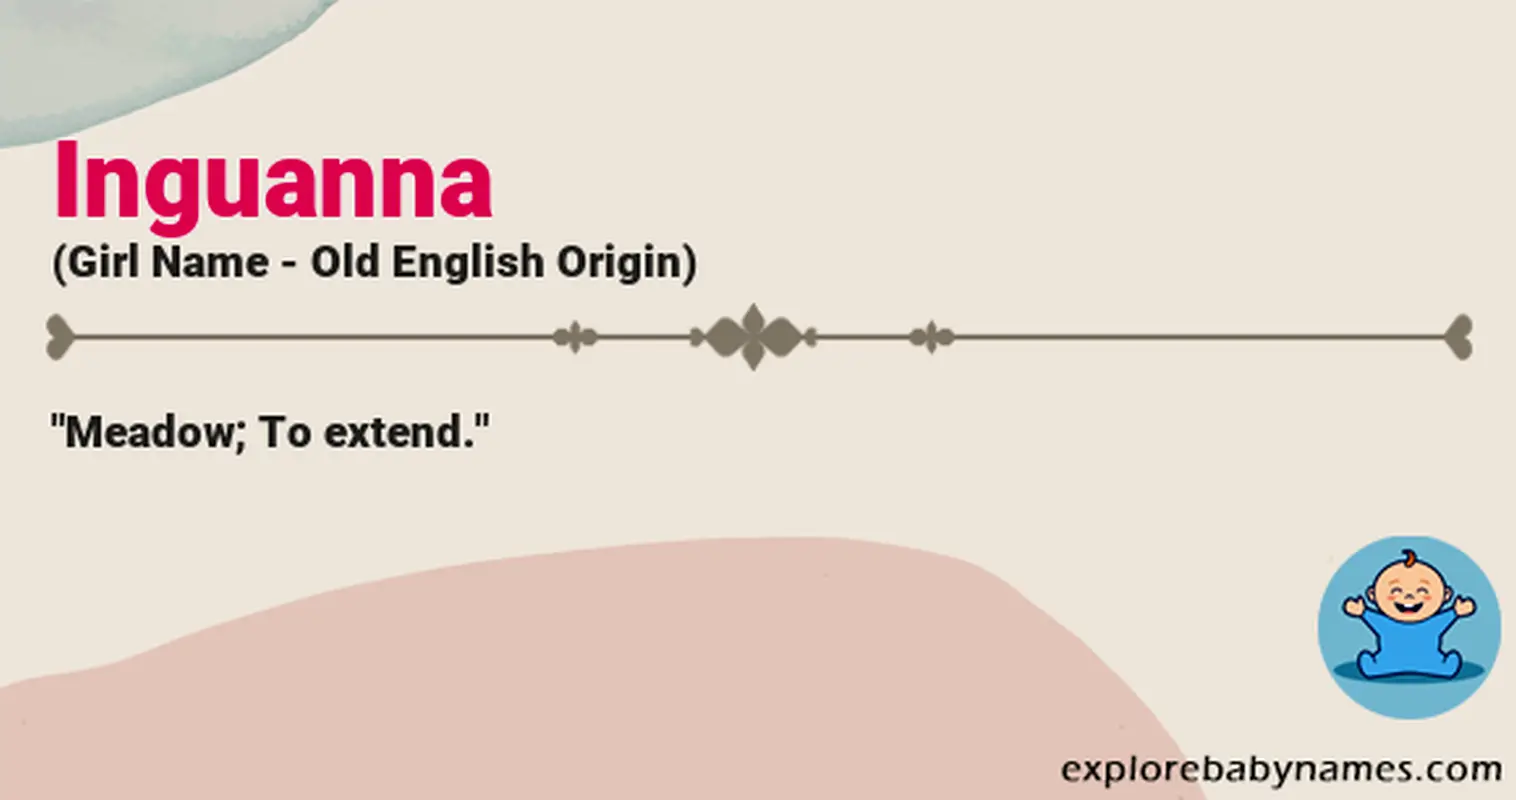 Meaning of Inguanna